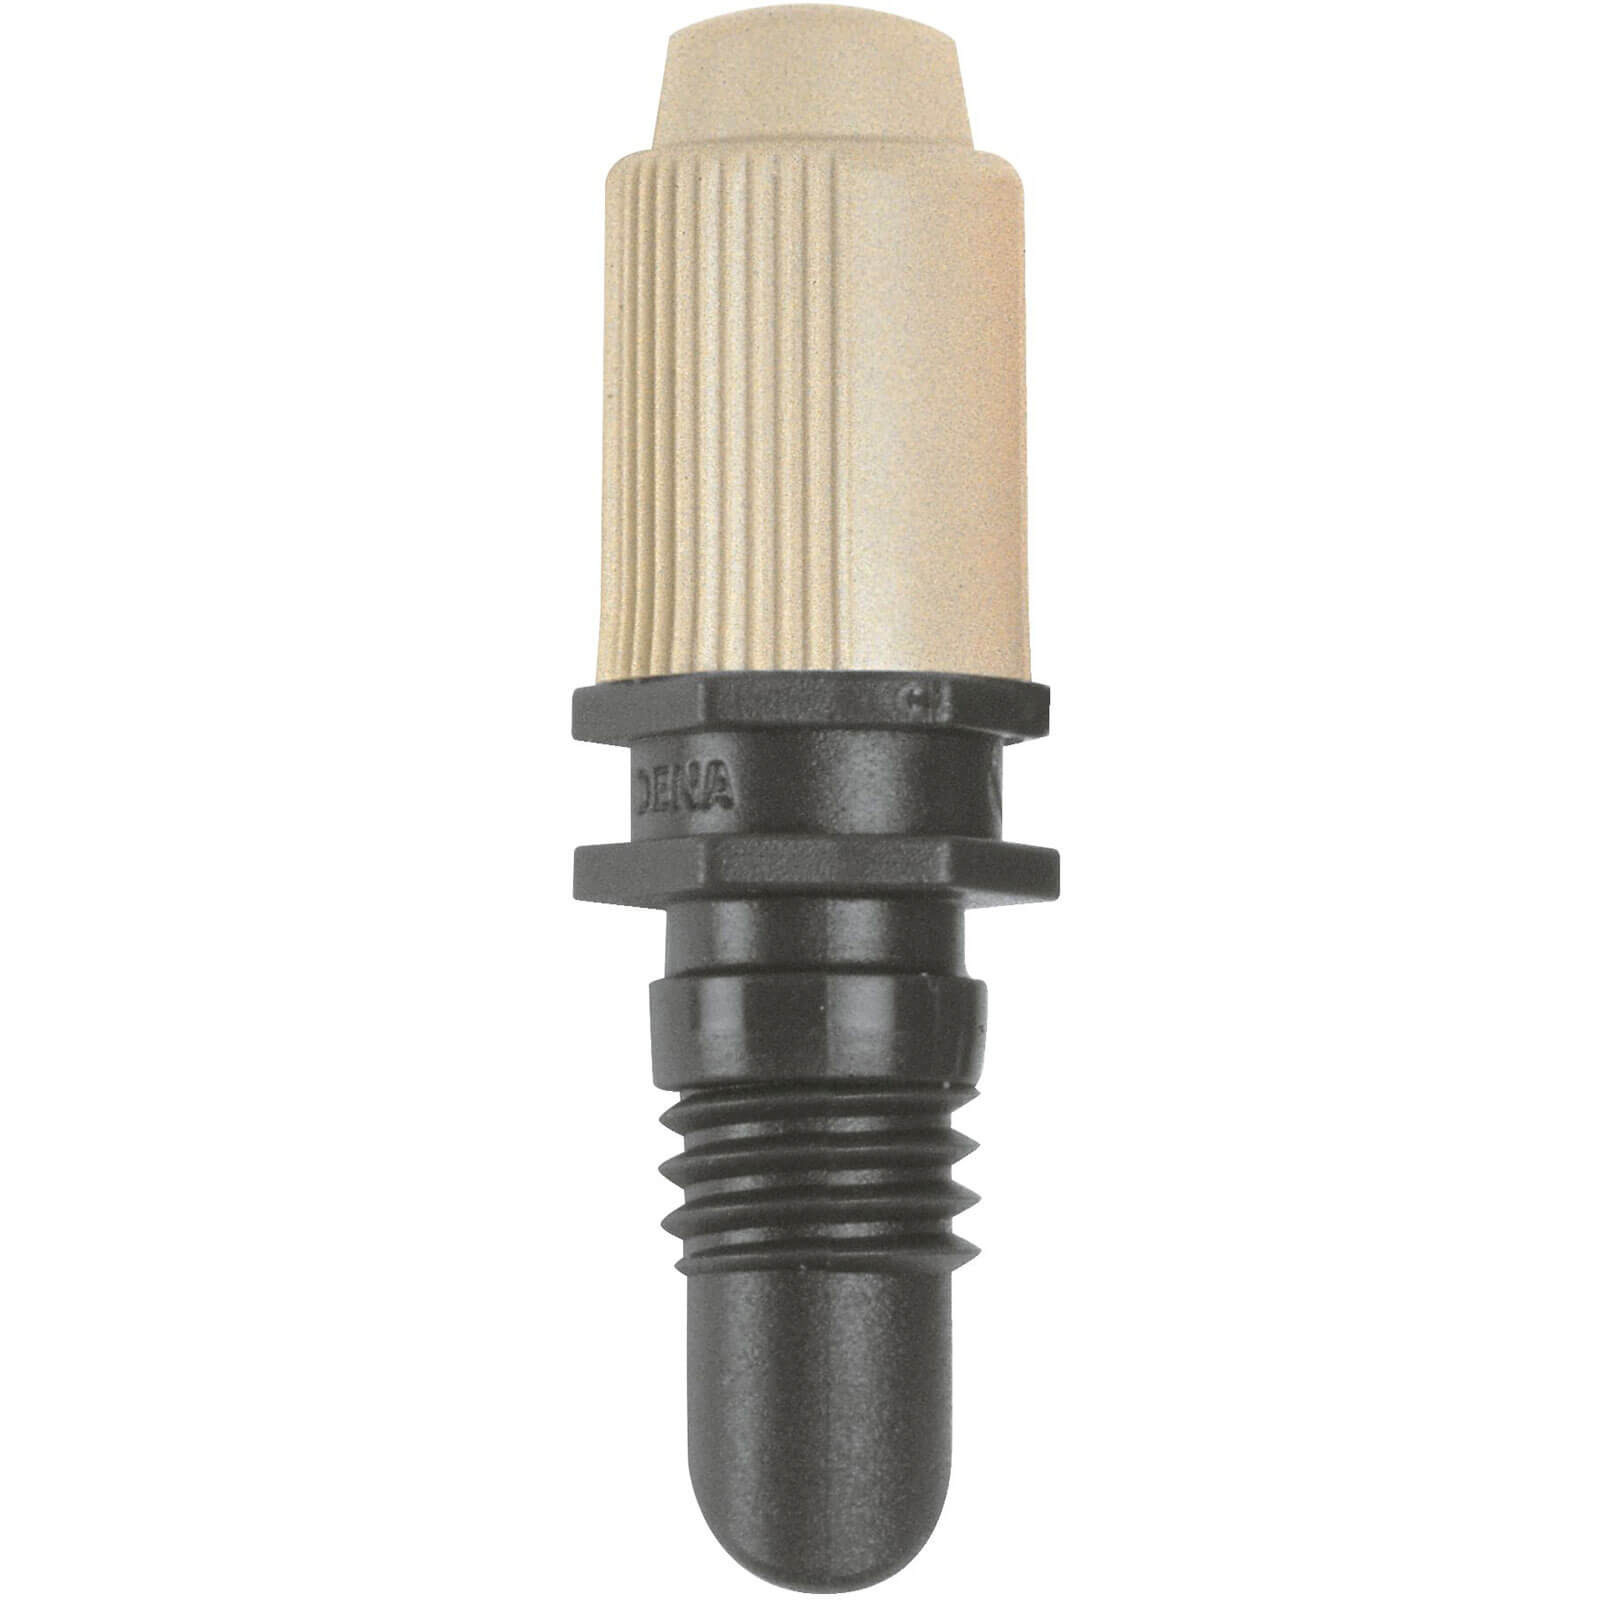 Image of Gardena MICRO DRIP Micro Mist Nozzle 3/16" / 4.6mm Pack of 5